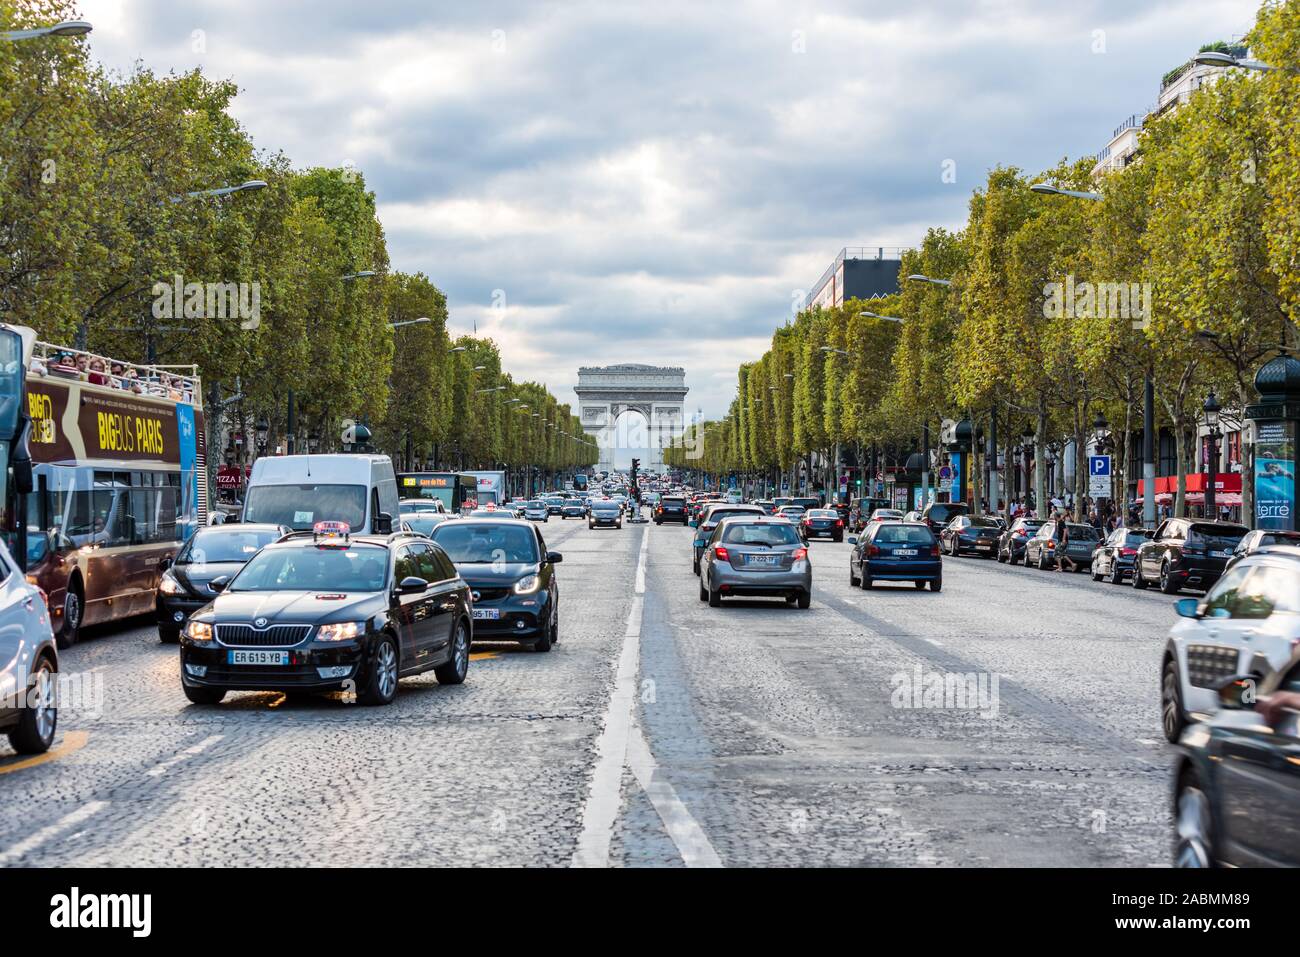 Street view of Champs-Elysees Avenue with Arc de Triomphe in Paris